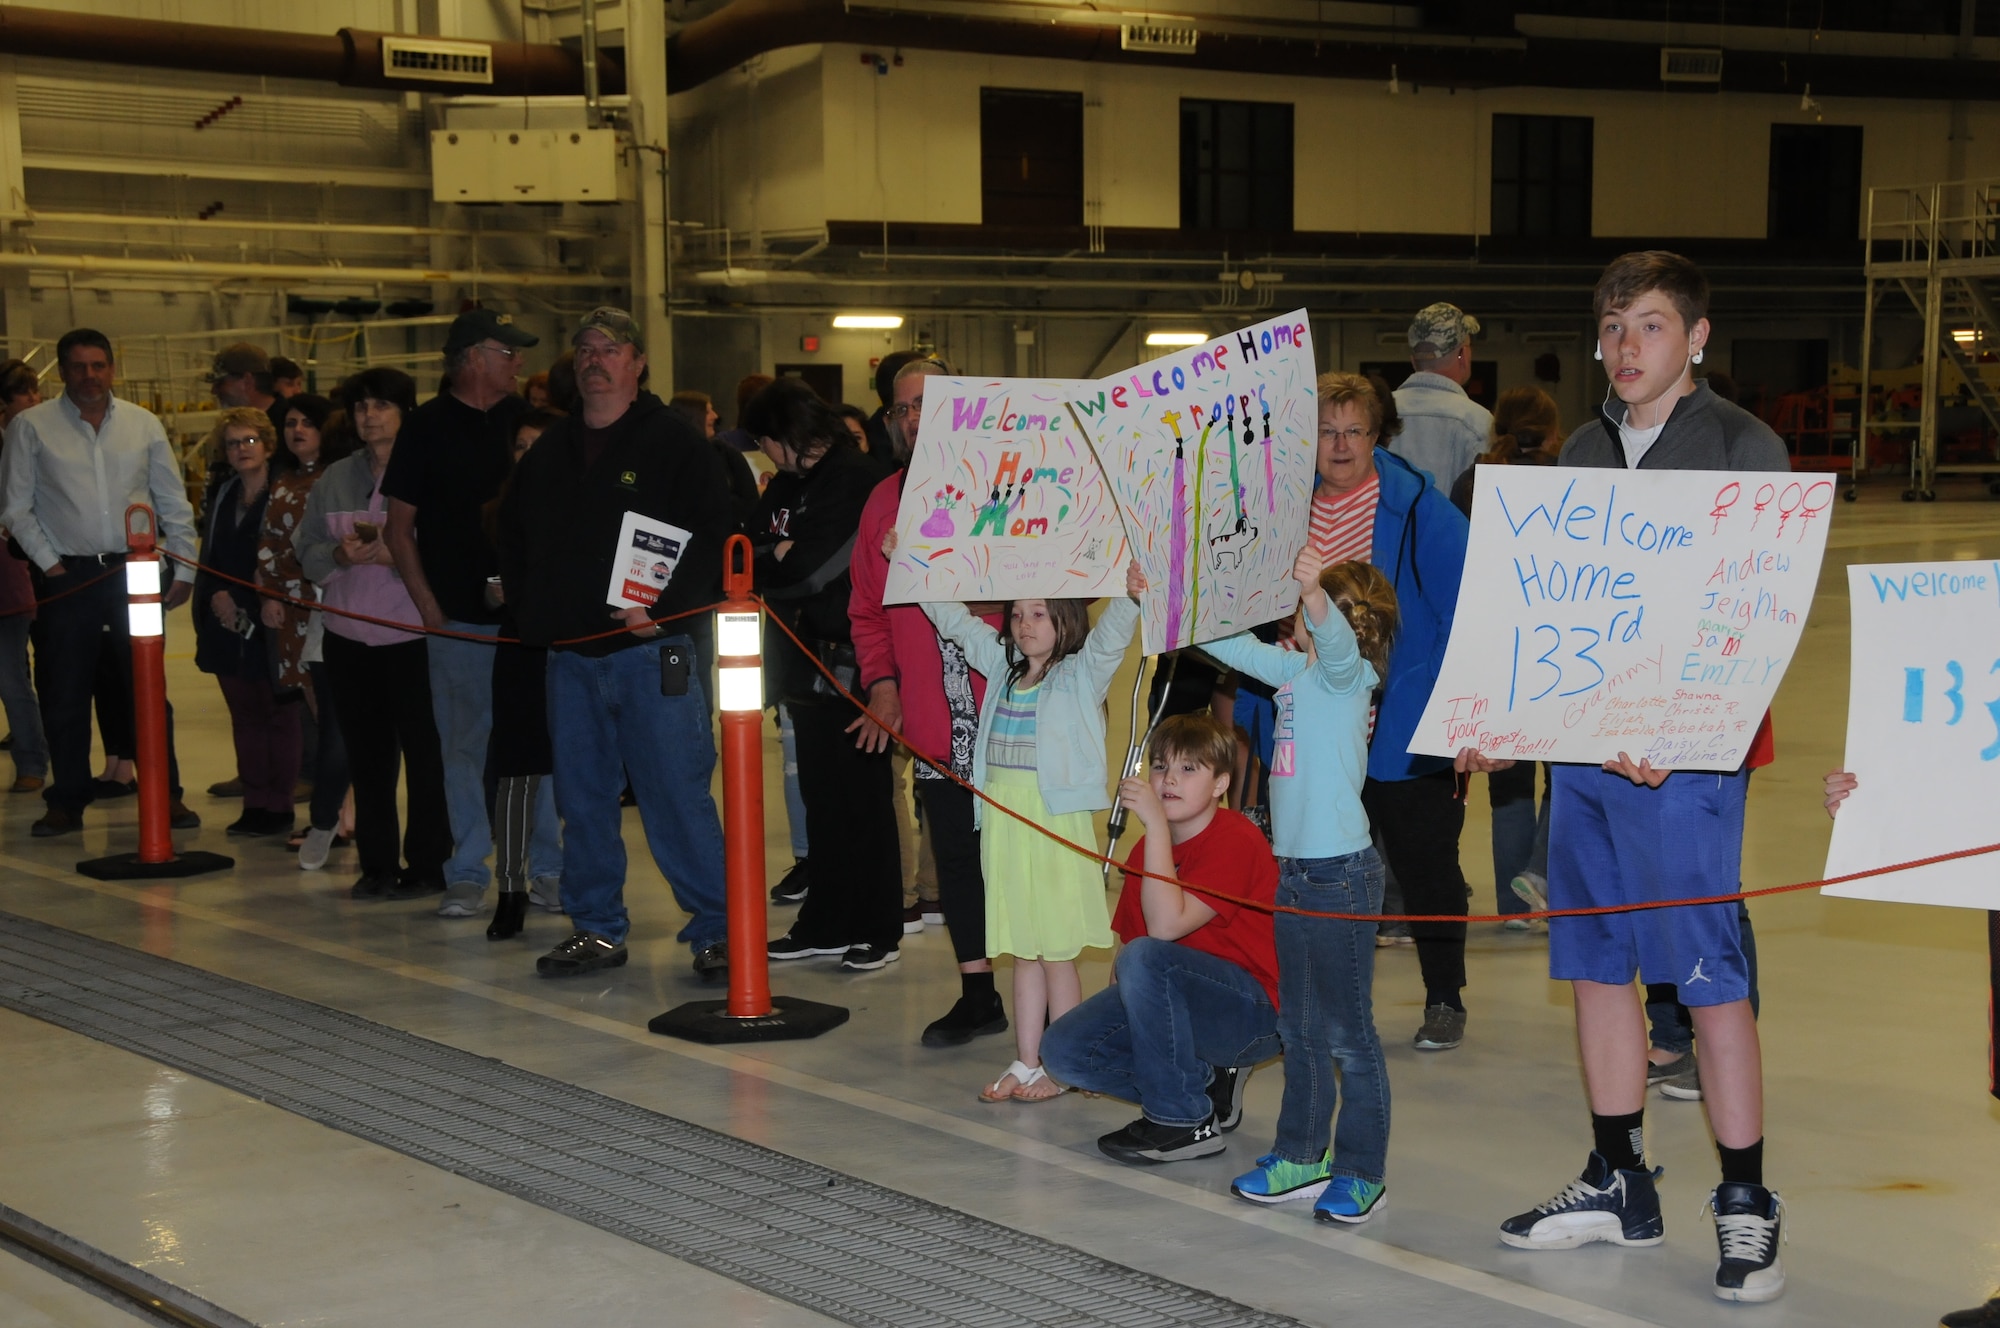 Members of the Iowa air National Guard’s 185th Air Refueling Wing were welcomed home by family and friends on April 25, 2018 at the Sioux City Air National Guard Base. Most of the returning members are assigned to the 133rd Test Squadron which is based in Fort Dodge, Iowa. While deployed, the 133rd Test Squadron were assigned to command and control duties in Central Command. (U.S. Air National Guard Photo by Capt. Jeremy J. McClure/Released)